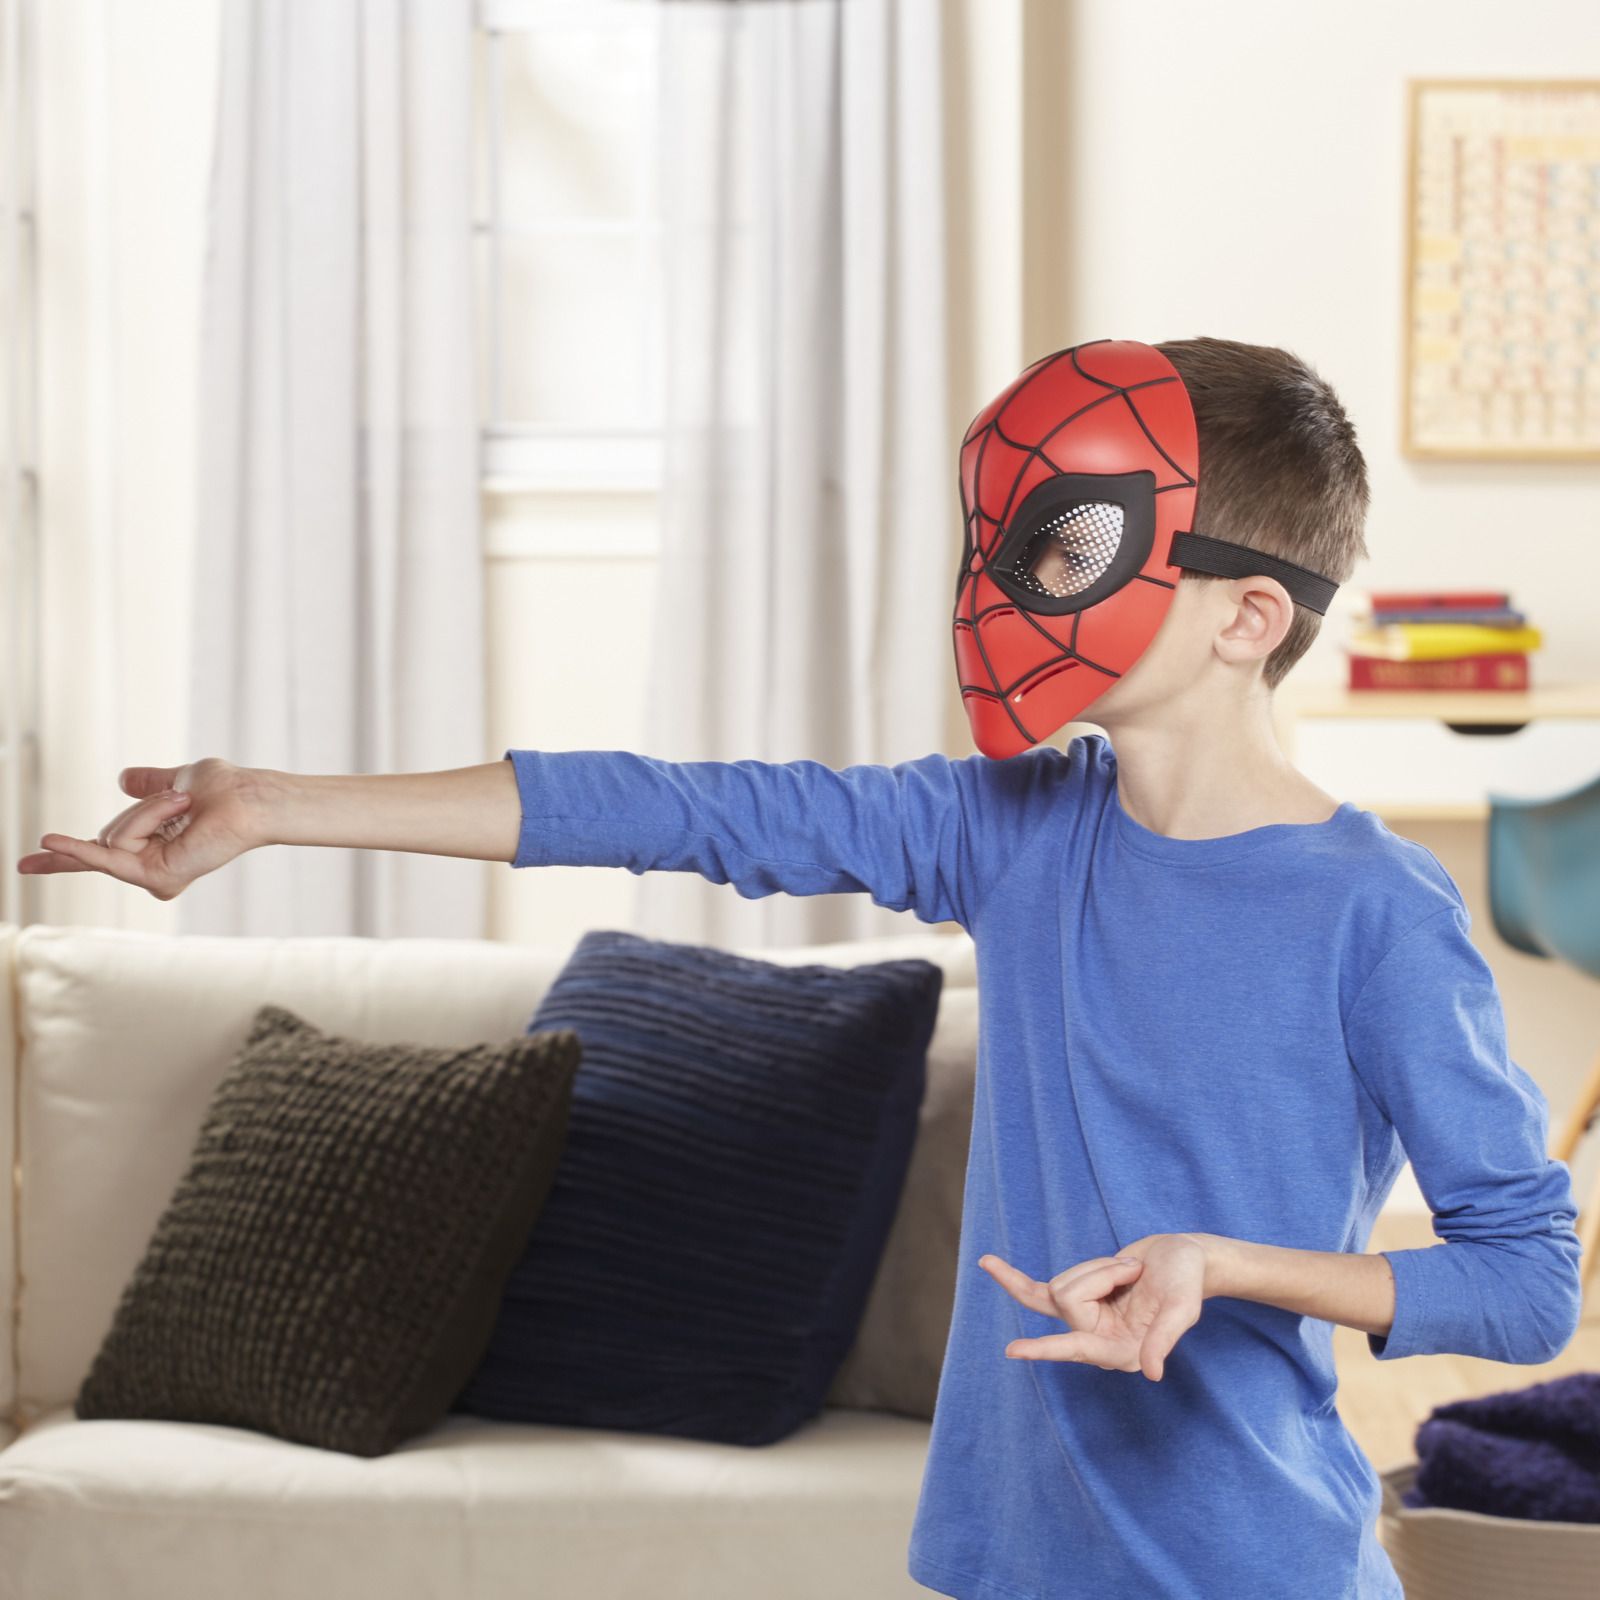   Spider-Man Role Play 